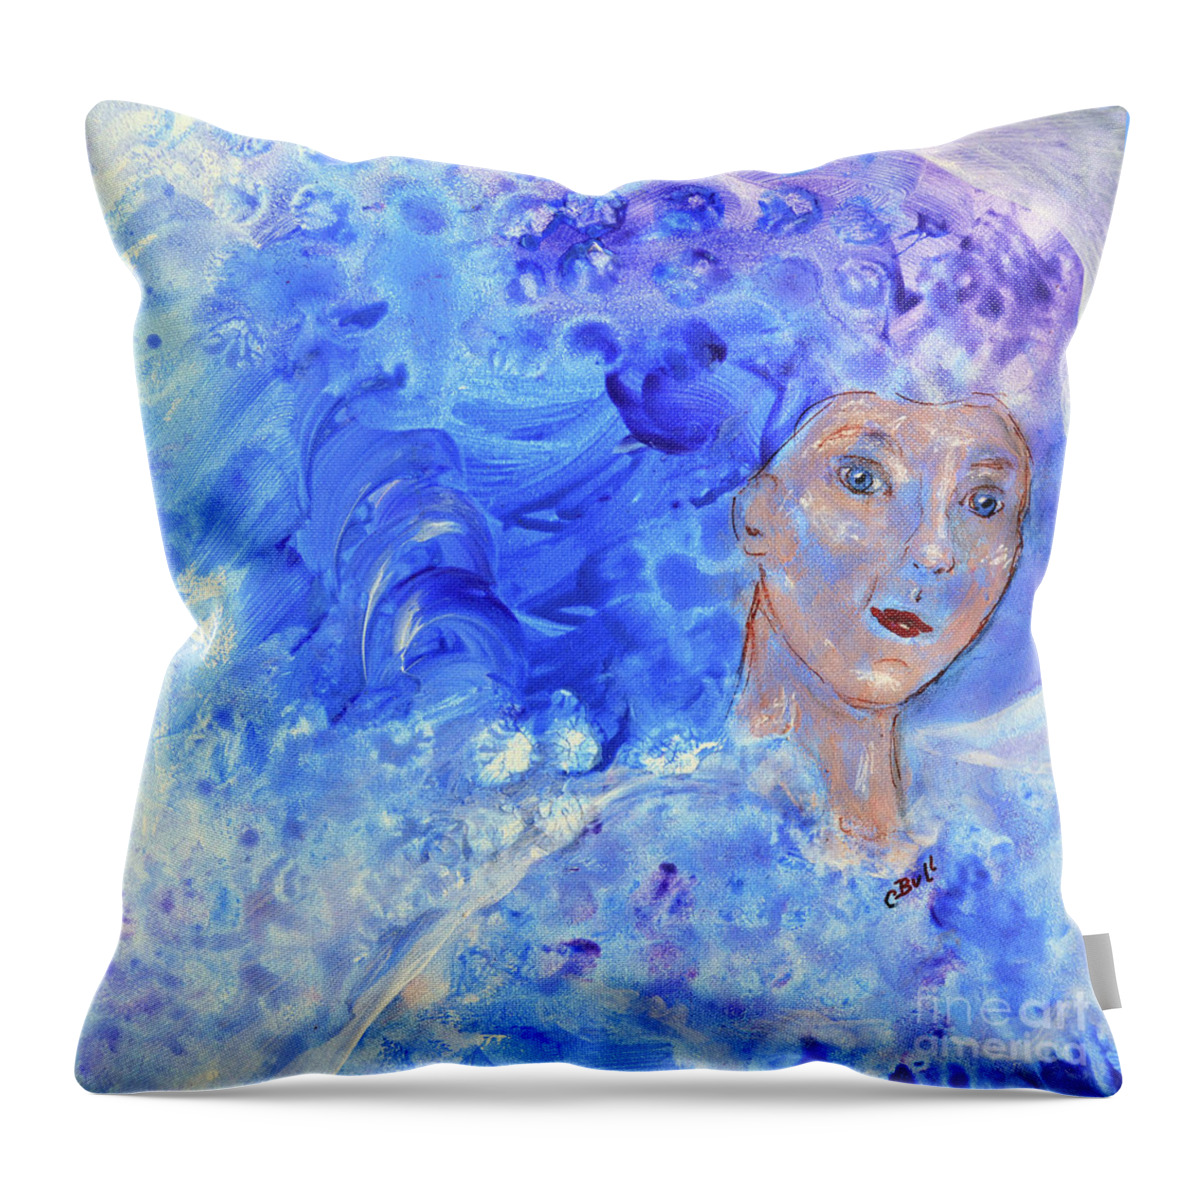 Woman Throw Pillow featuring the painting Jack Frost's Girl by Claire Bull